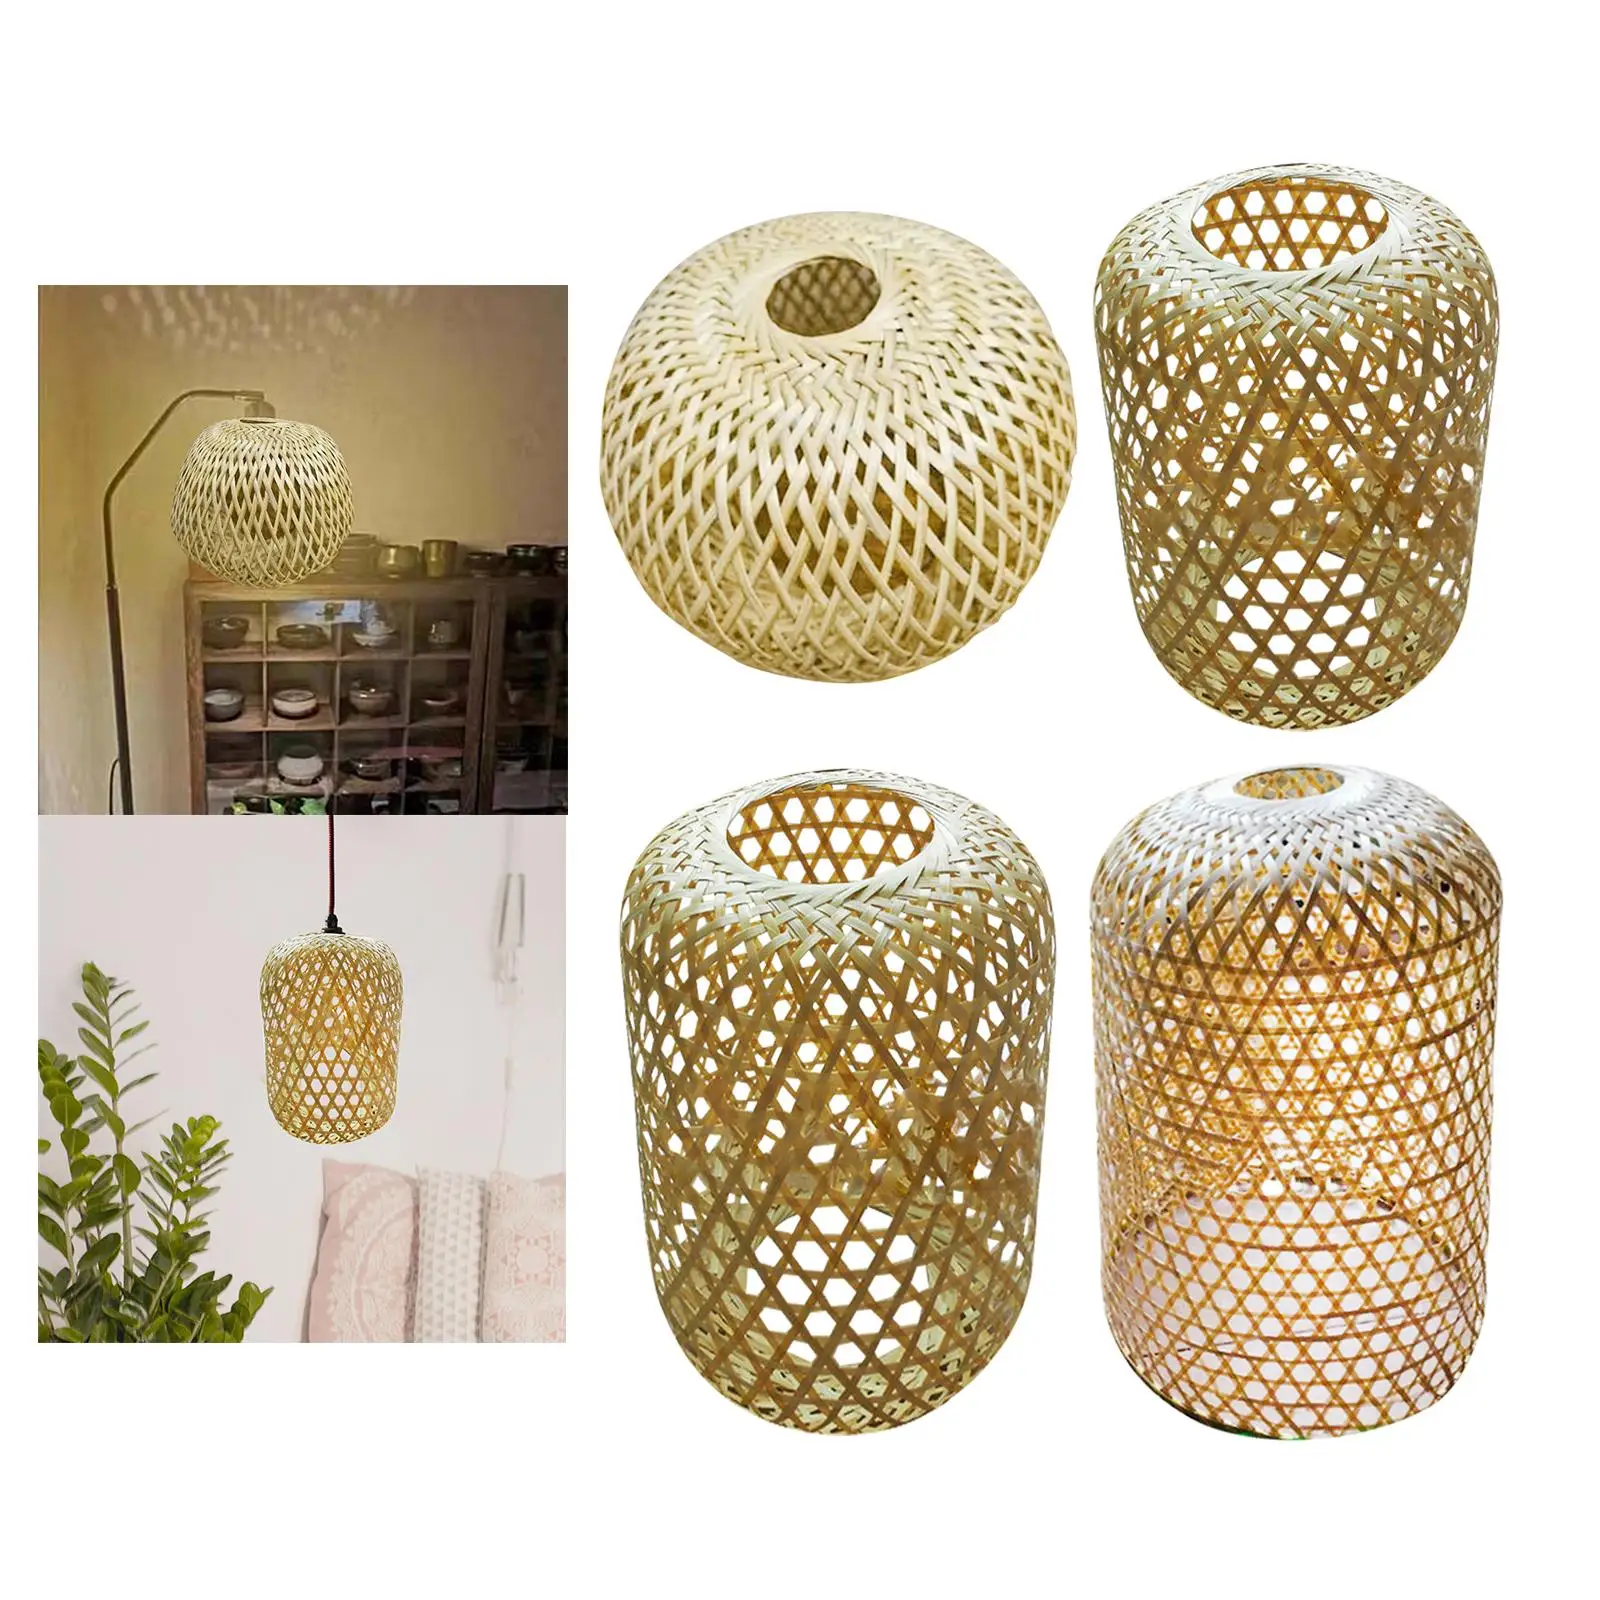 Weaving Bamboo Lamp Shade Crafts Hanging Decorative Ornament Lantern Lamp Accessory for Kitchen Hotel Cafe Farm Decor